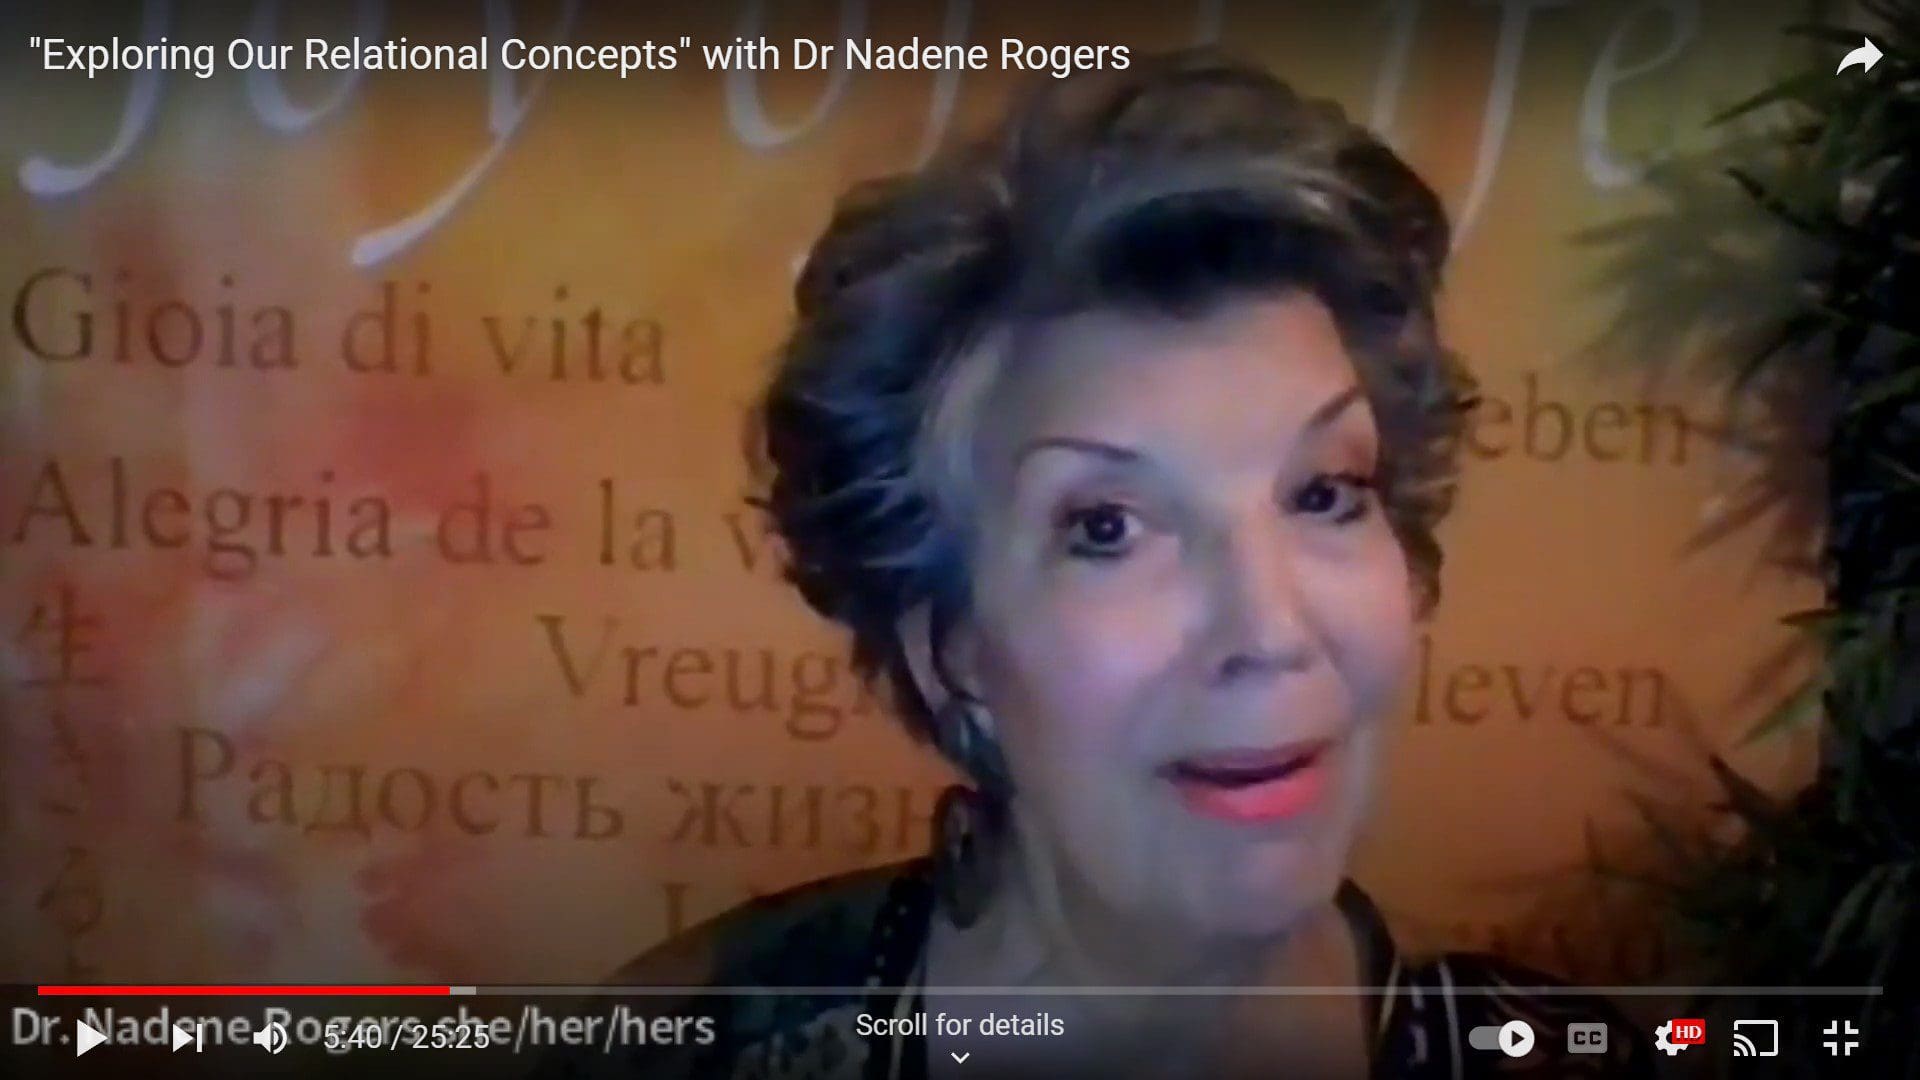 "Exploring Our Relational Concepts" – Rev. Dr. Nadene Rogers